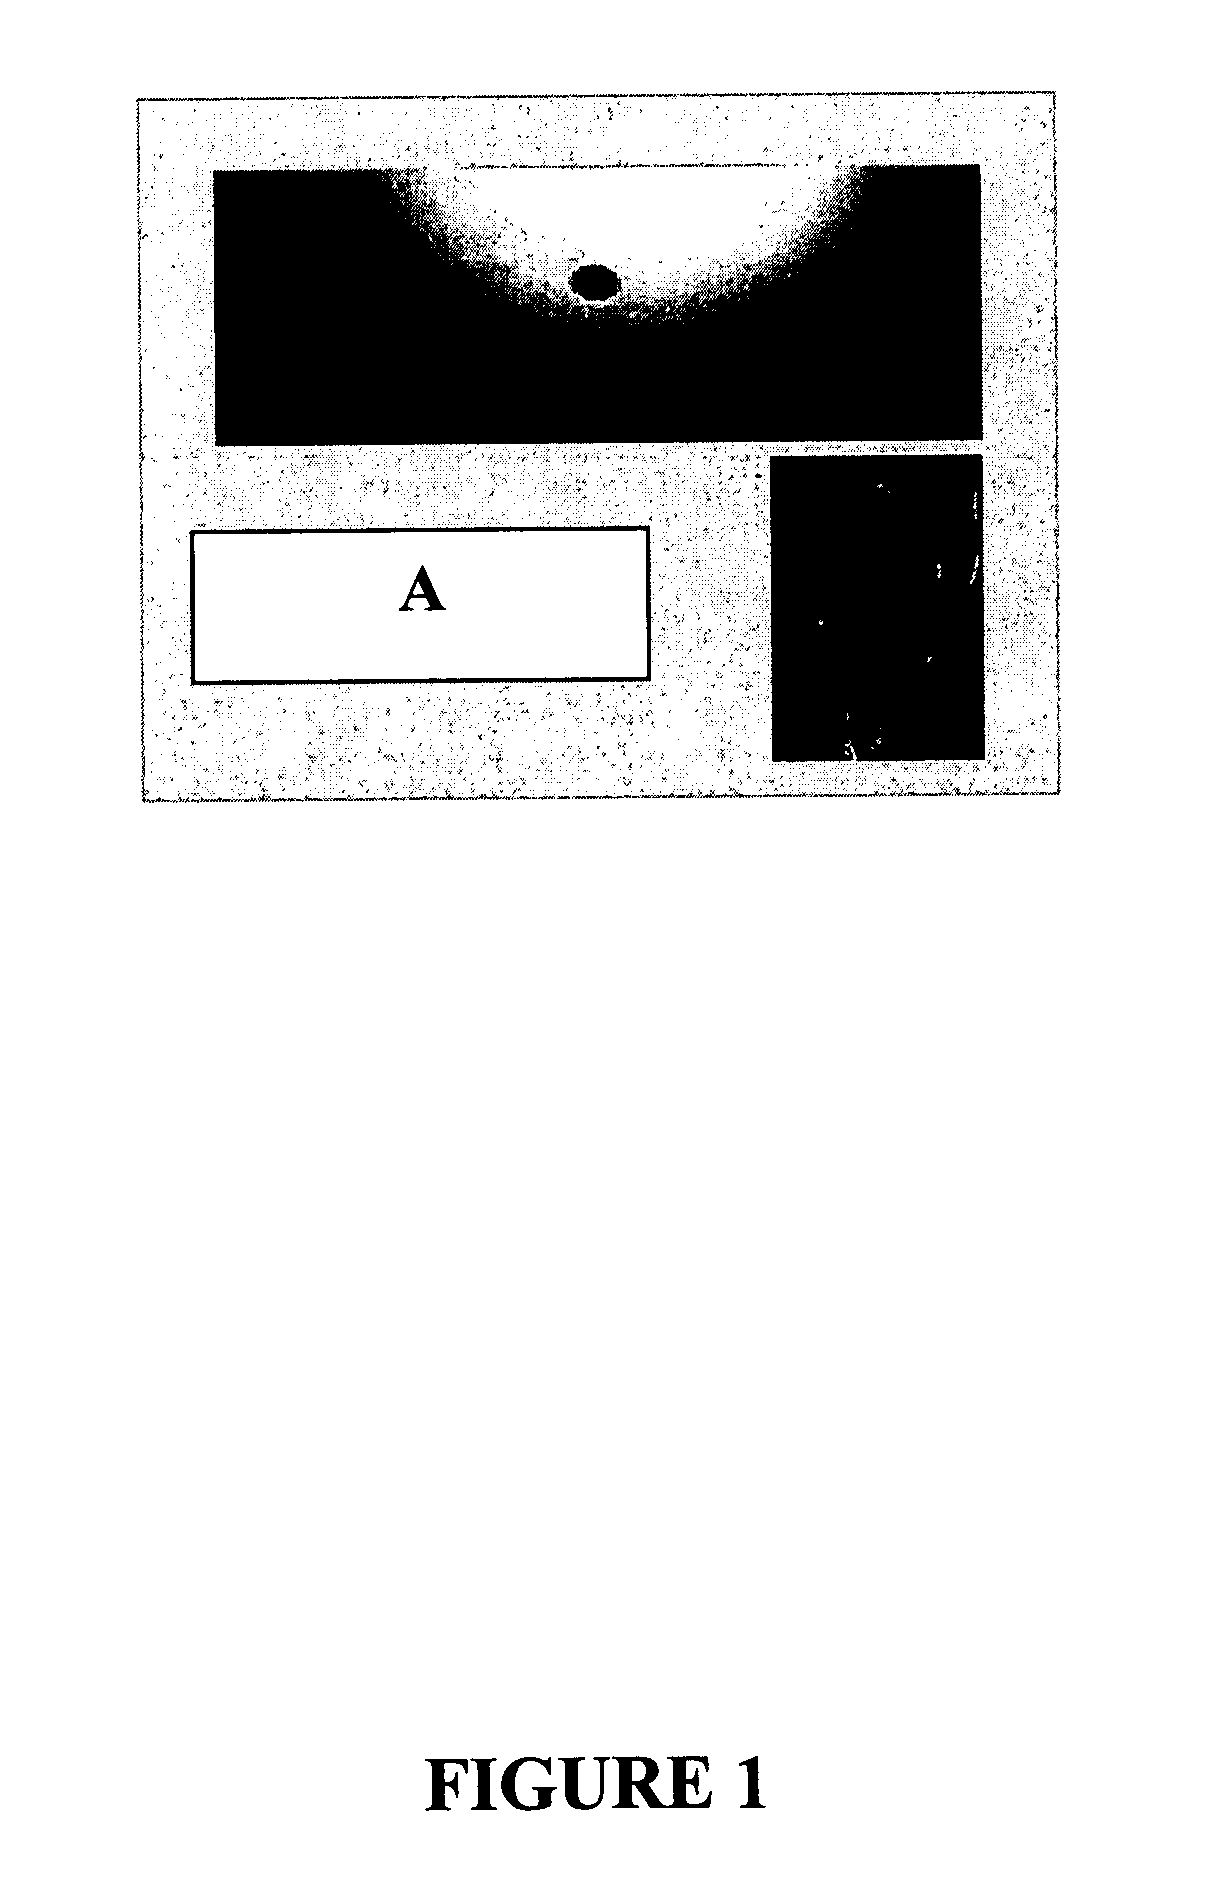 Multi-modality marking material and method